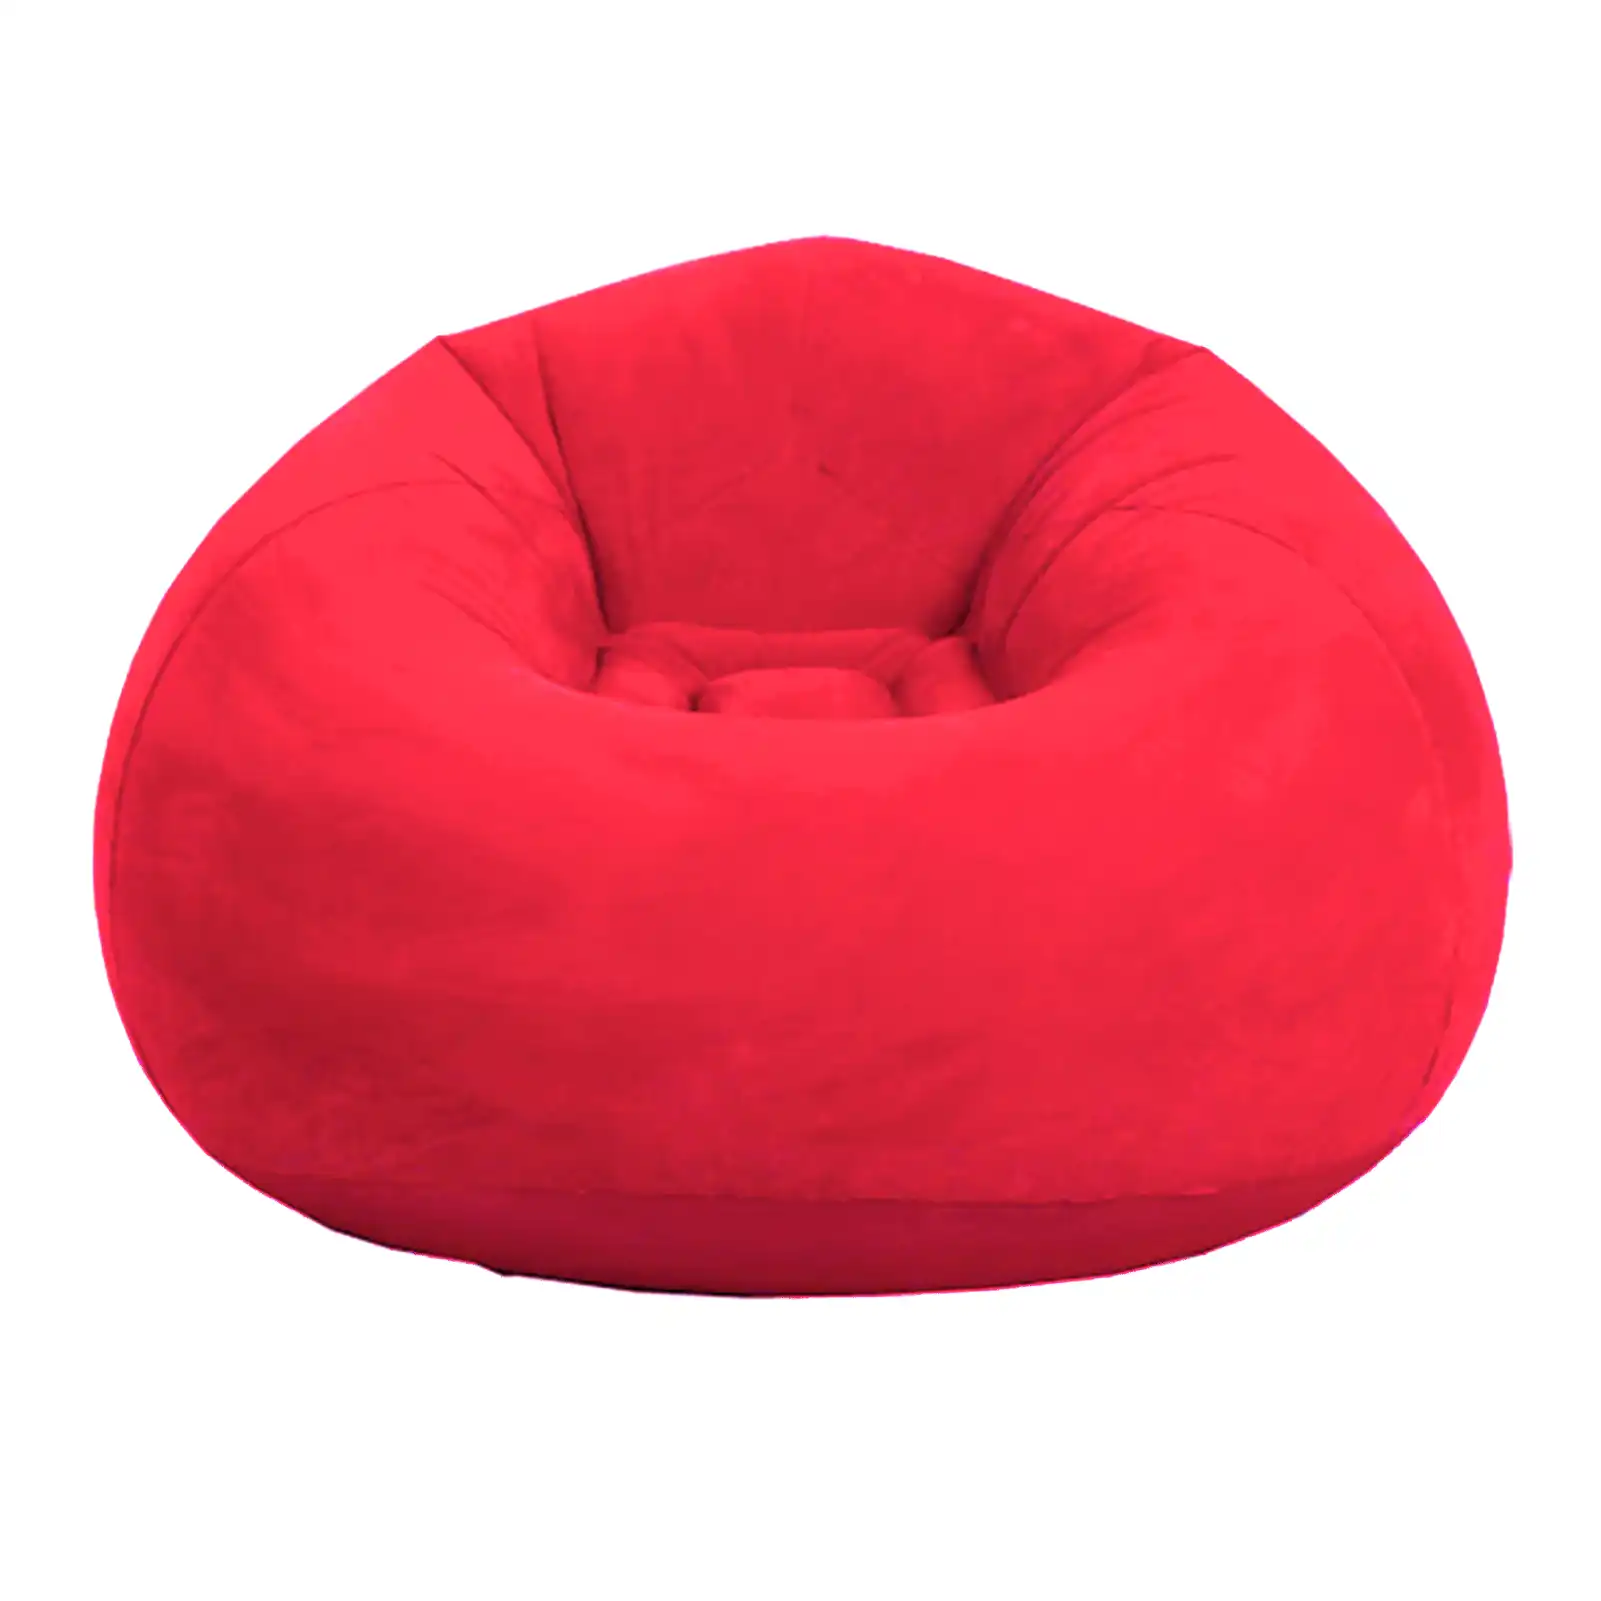 Bedroom Comfortable Home Decoration Washable Couch Bean Bag Chair No Filler Living Room Ultra Soft Outdoor Inflatable Lazy Sofa Outdoor Bean Bag Sofas Aliexpress